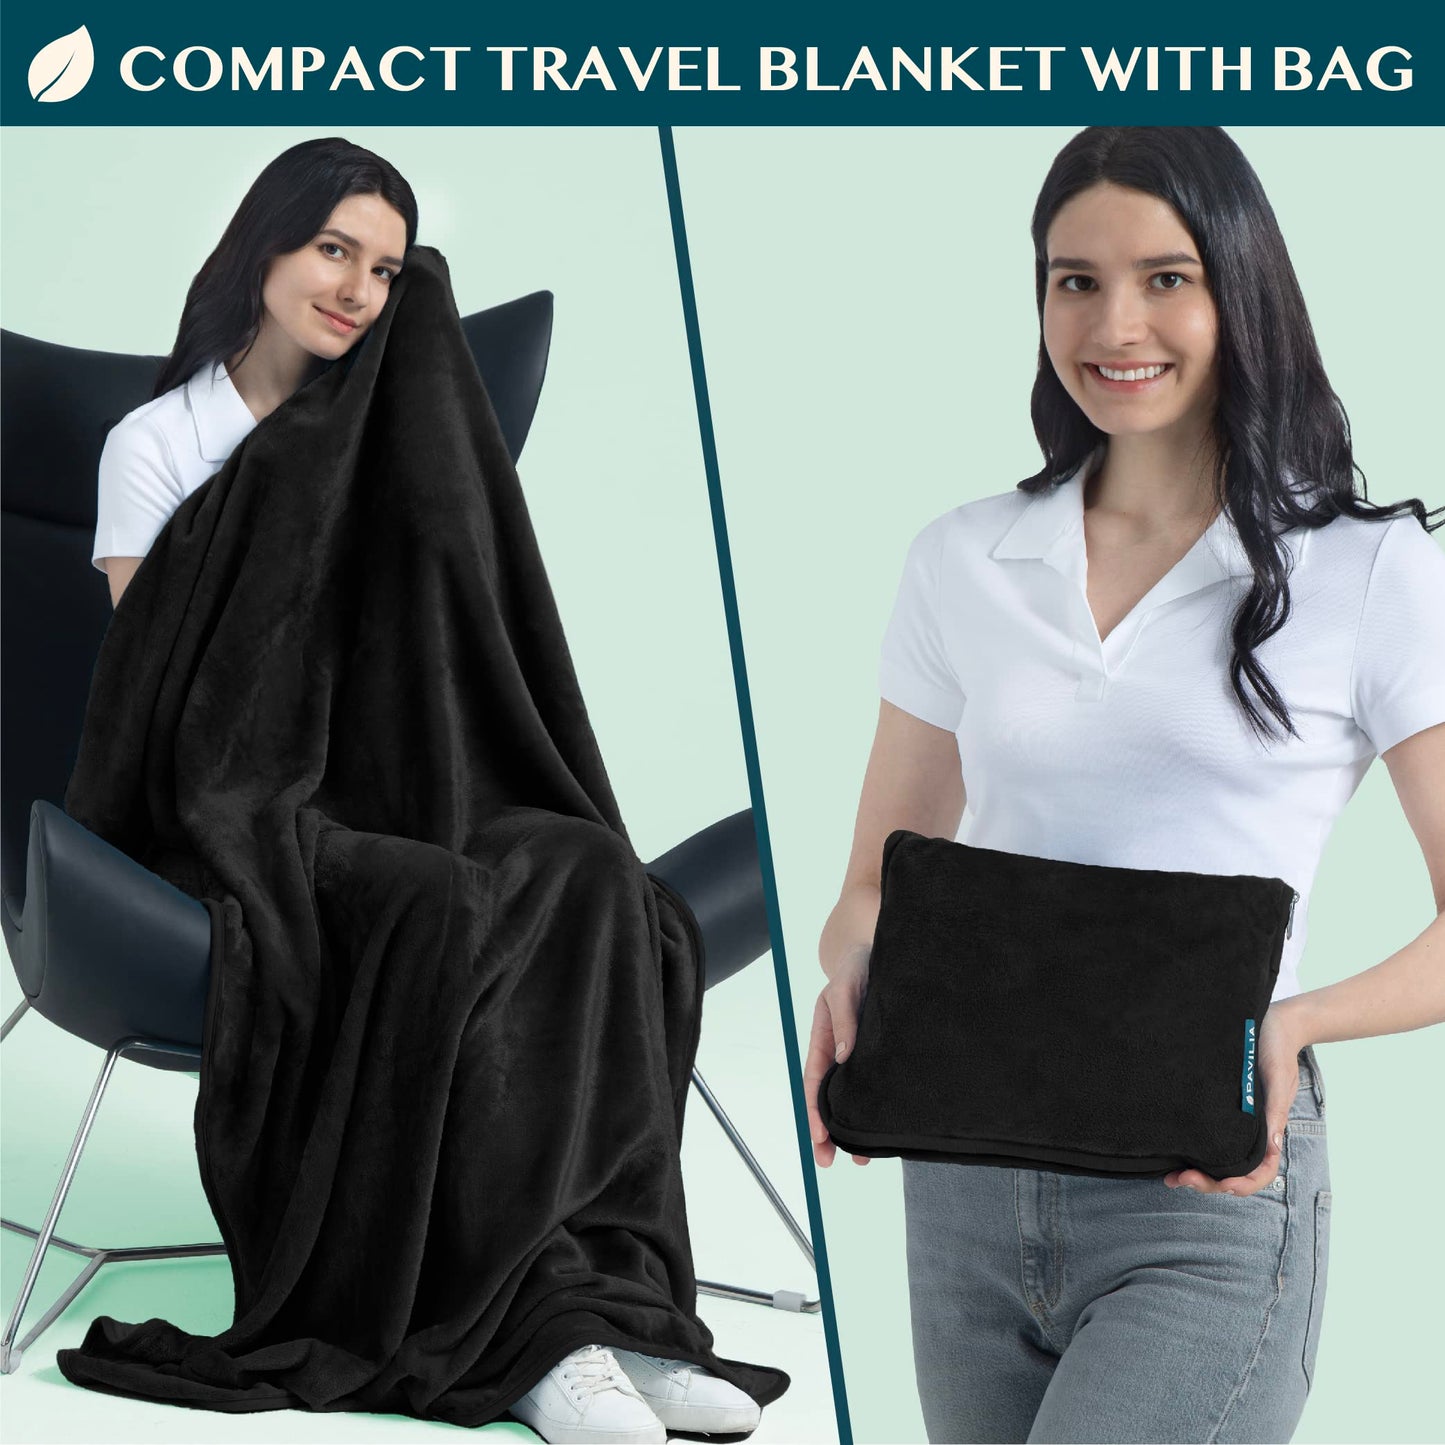 PAVILIA Travel Blanket Pillow, Soft Airplane Blanket 2-in-1 Combo Set, Plane Blanket Compact Packable, Flight Essentials Car Pillow, Travelers Gifts Accessories, Luggage Backpack Strap, 60x43 Black